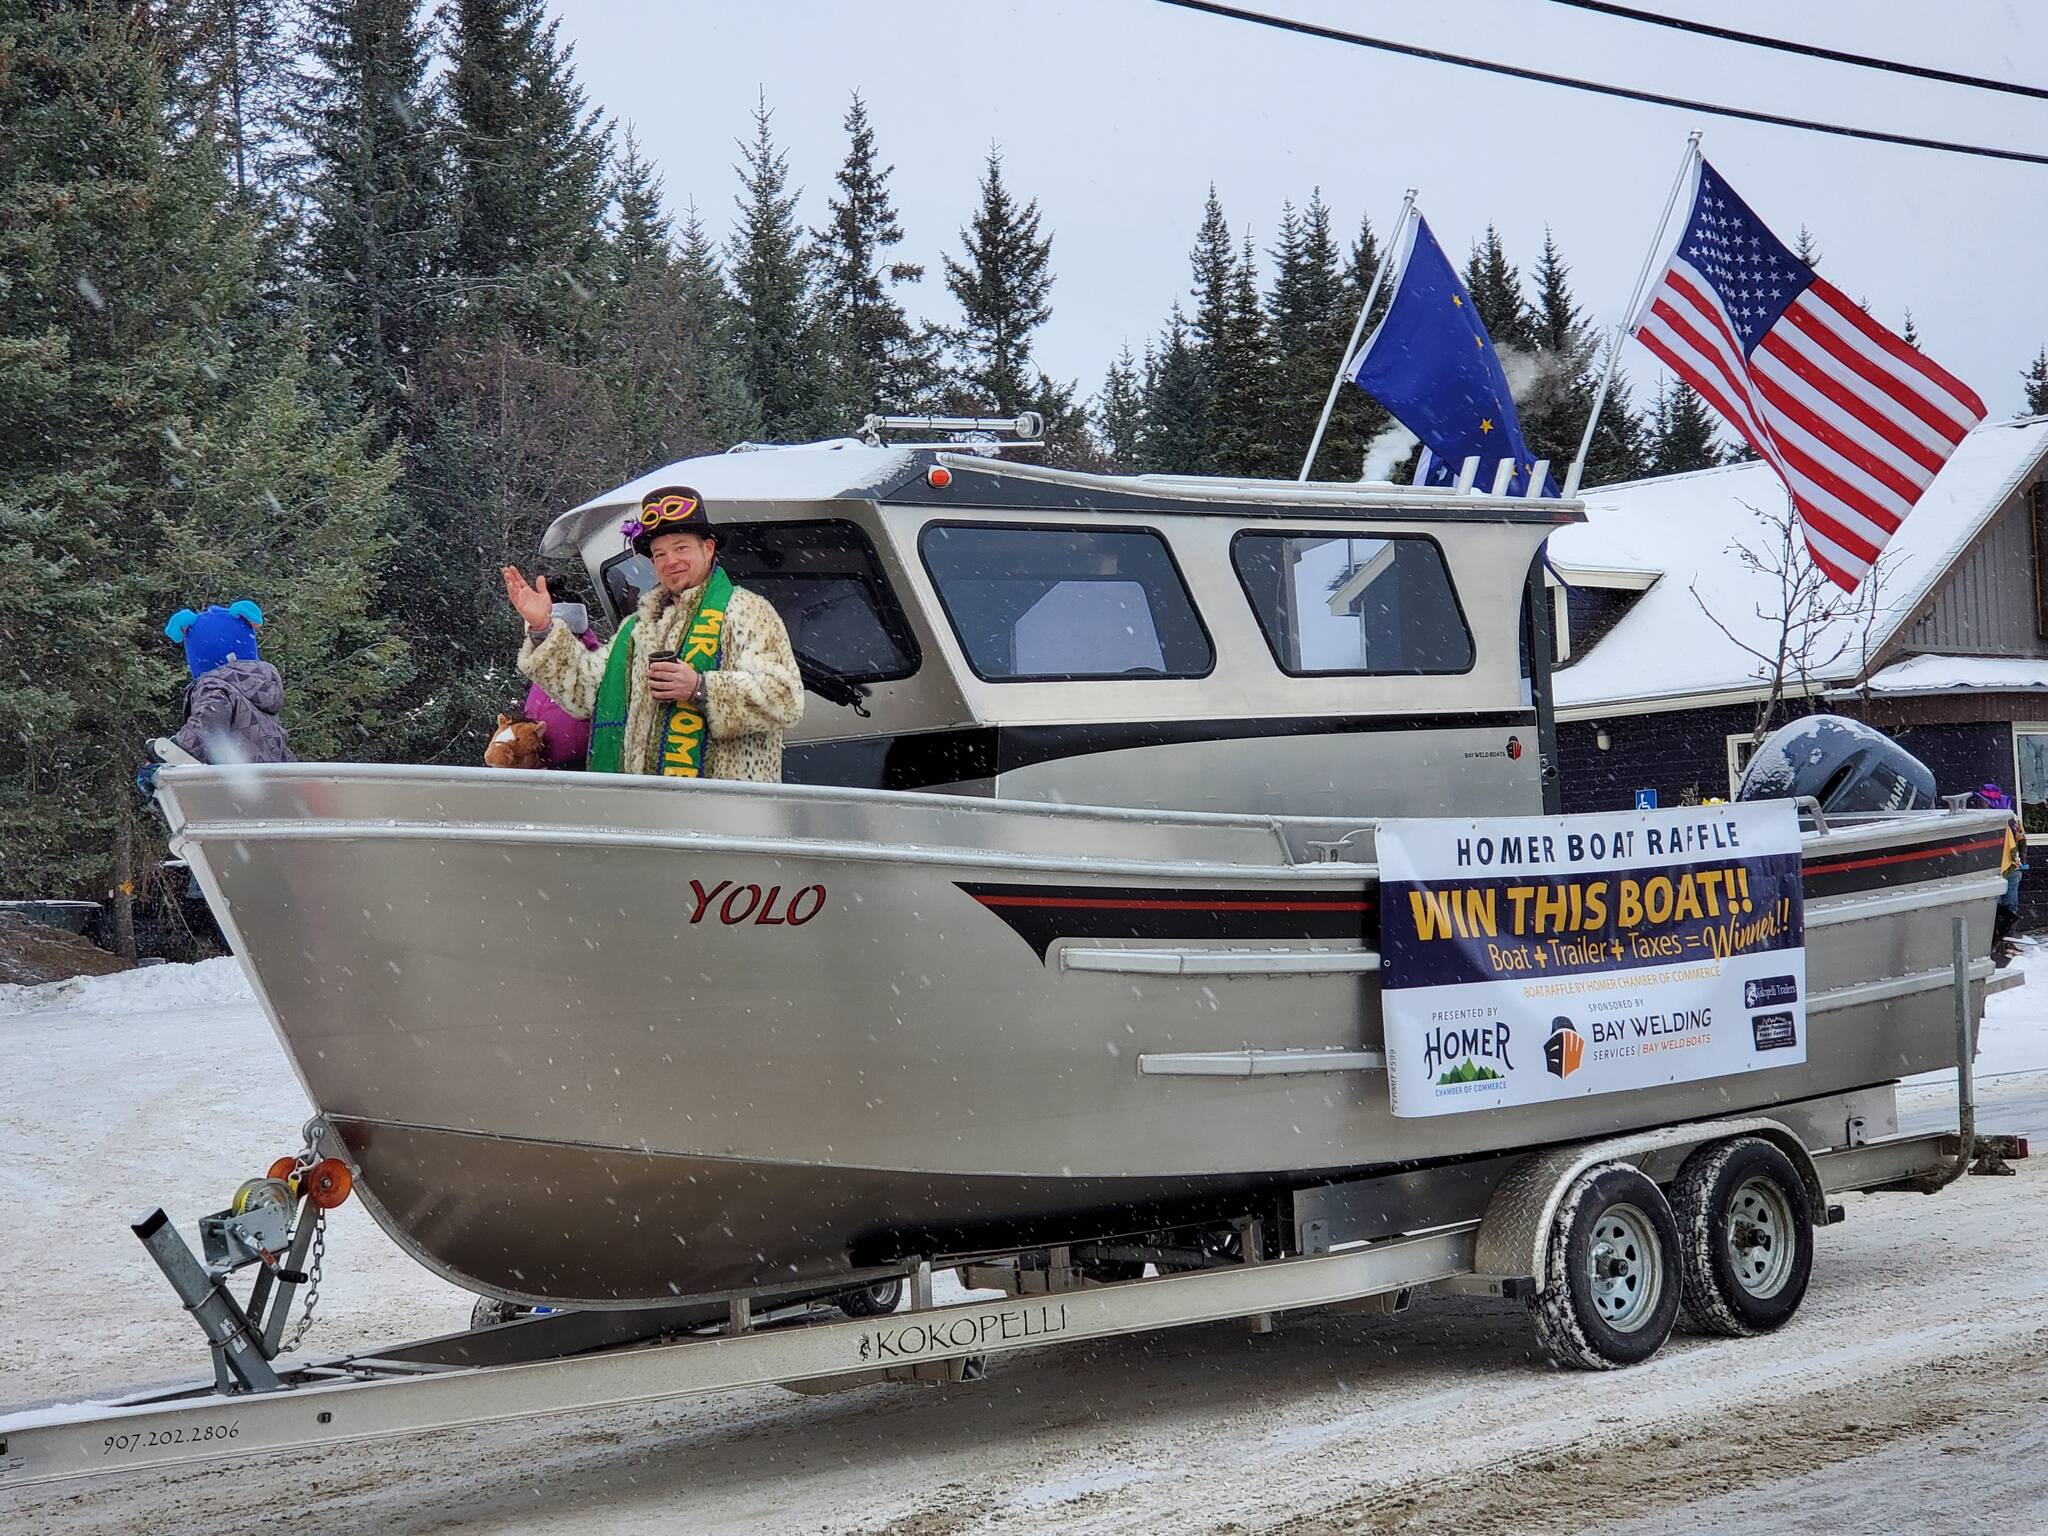 Garrett Brooks, winner of the 2023 Mr. Homer contest, waves to the crowd from a Bay Welding boat serving as the Homer Boat Raffle prize and the Homer Chamber of Commerce float in the 69th Annual Winter Carnival Parade on Saturday, Feb. 11, 2023 in Homer, Alaska. Photo by Delcenia Cosman